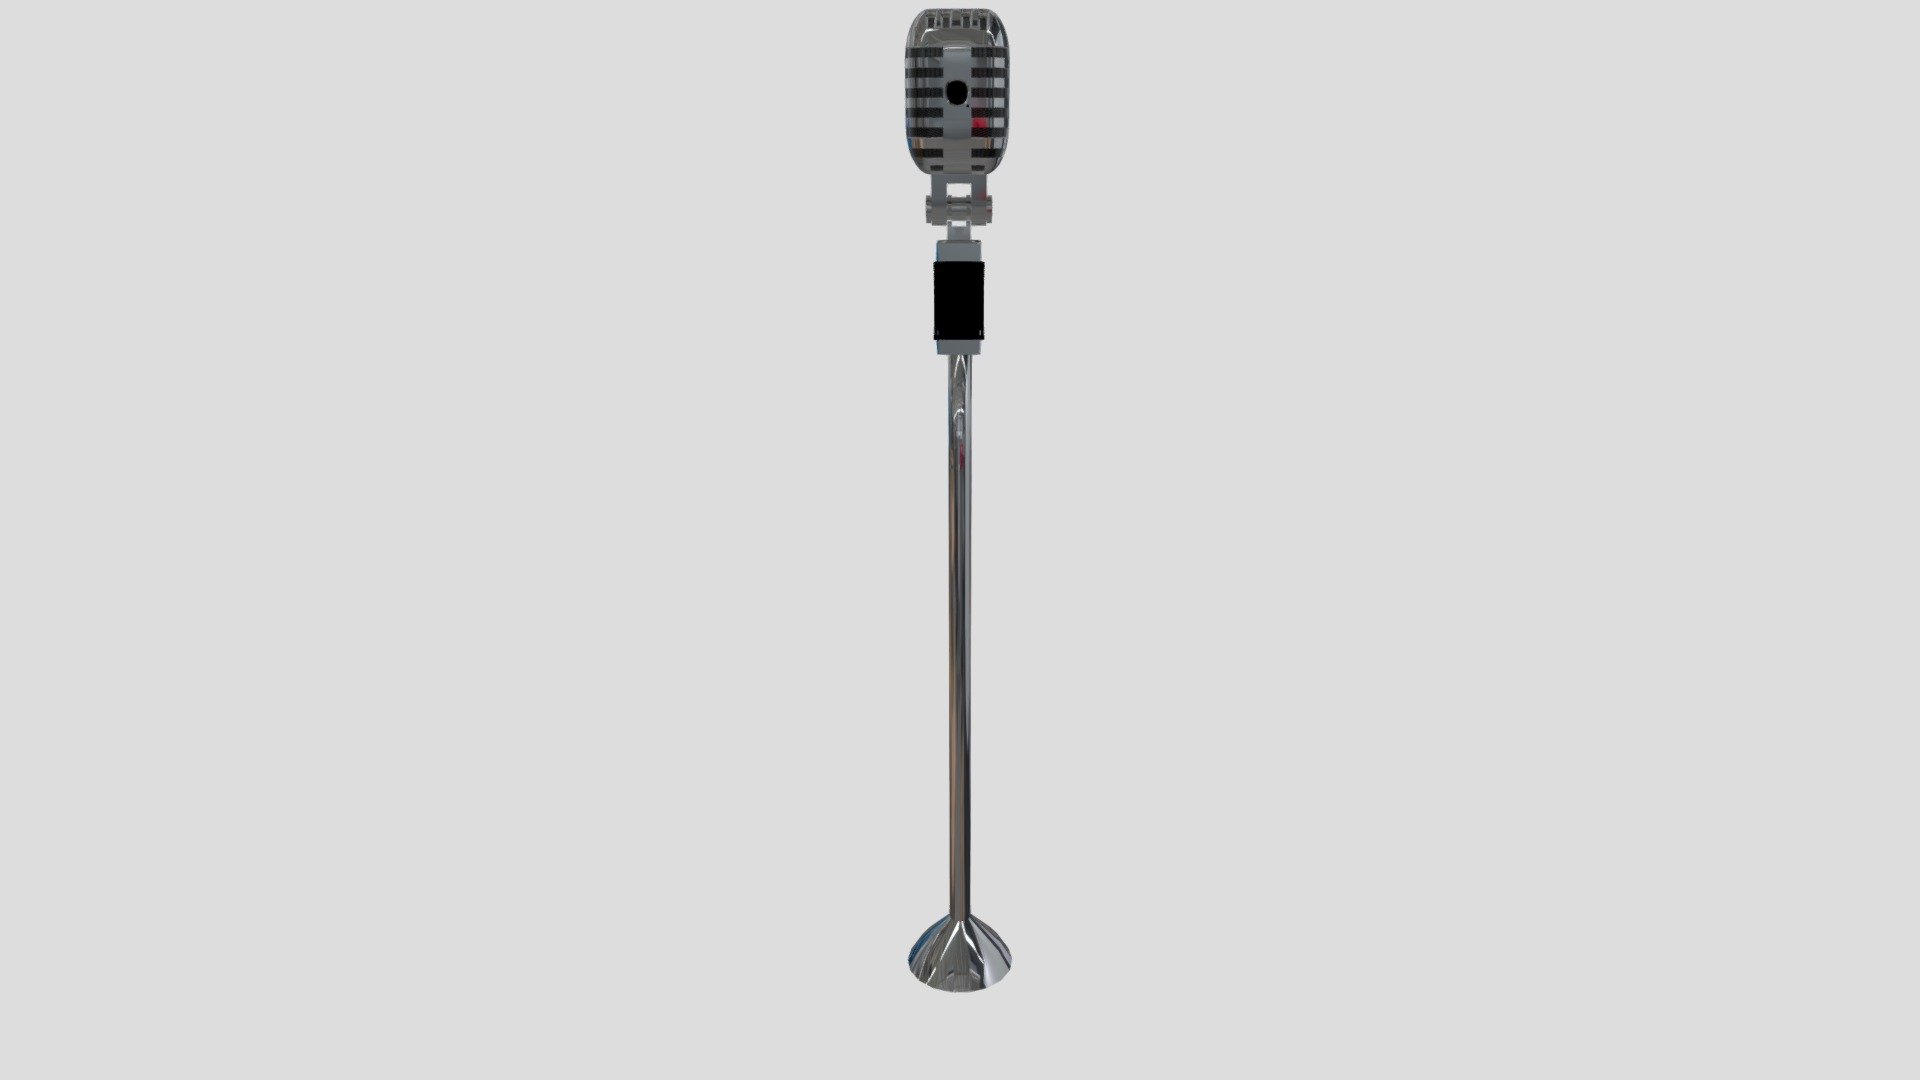 Old Microphone